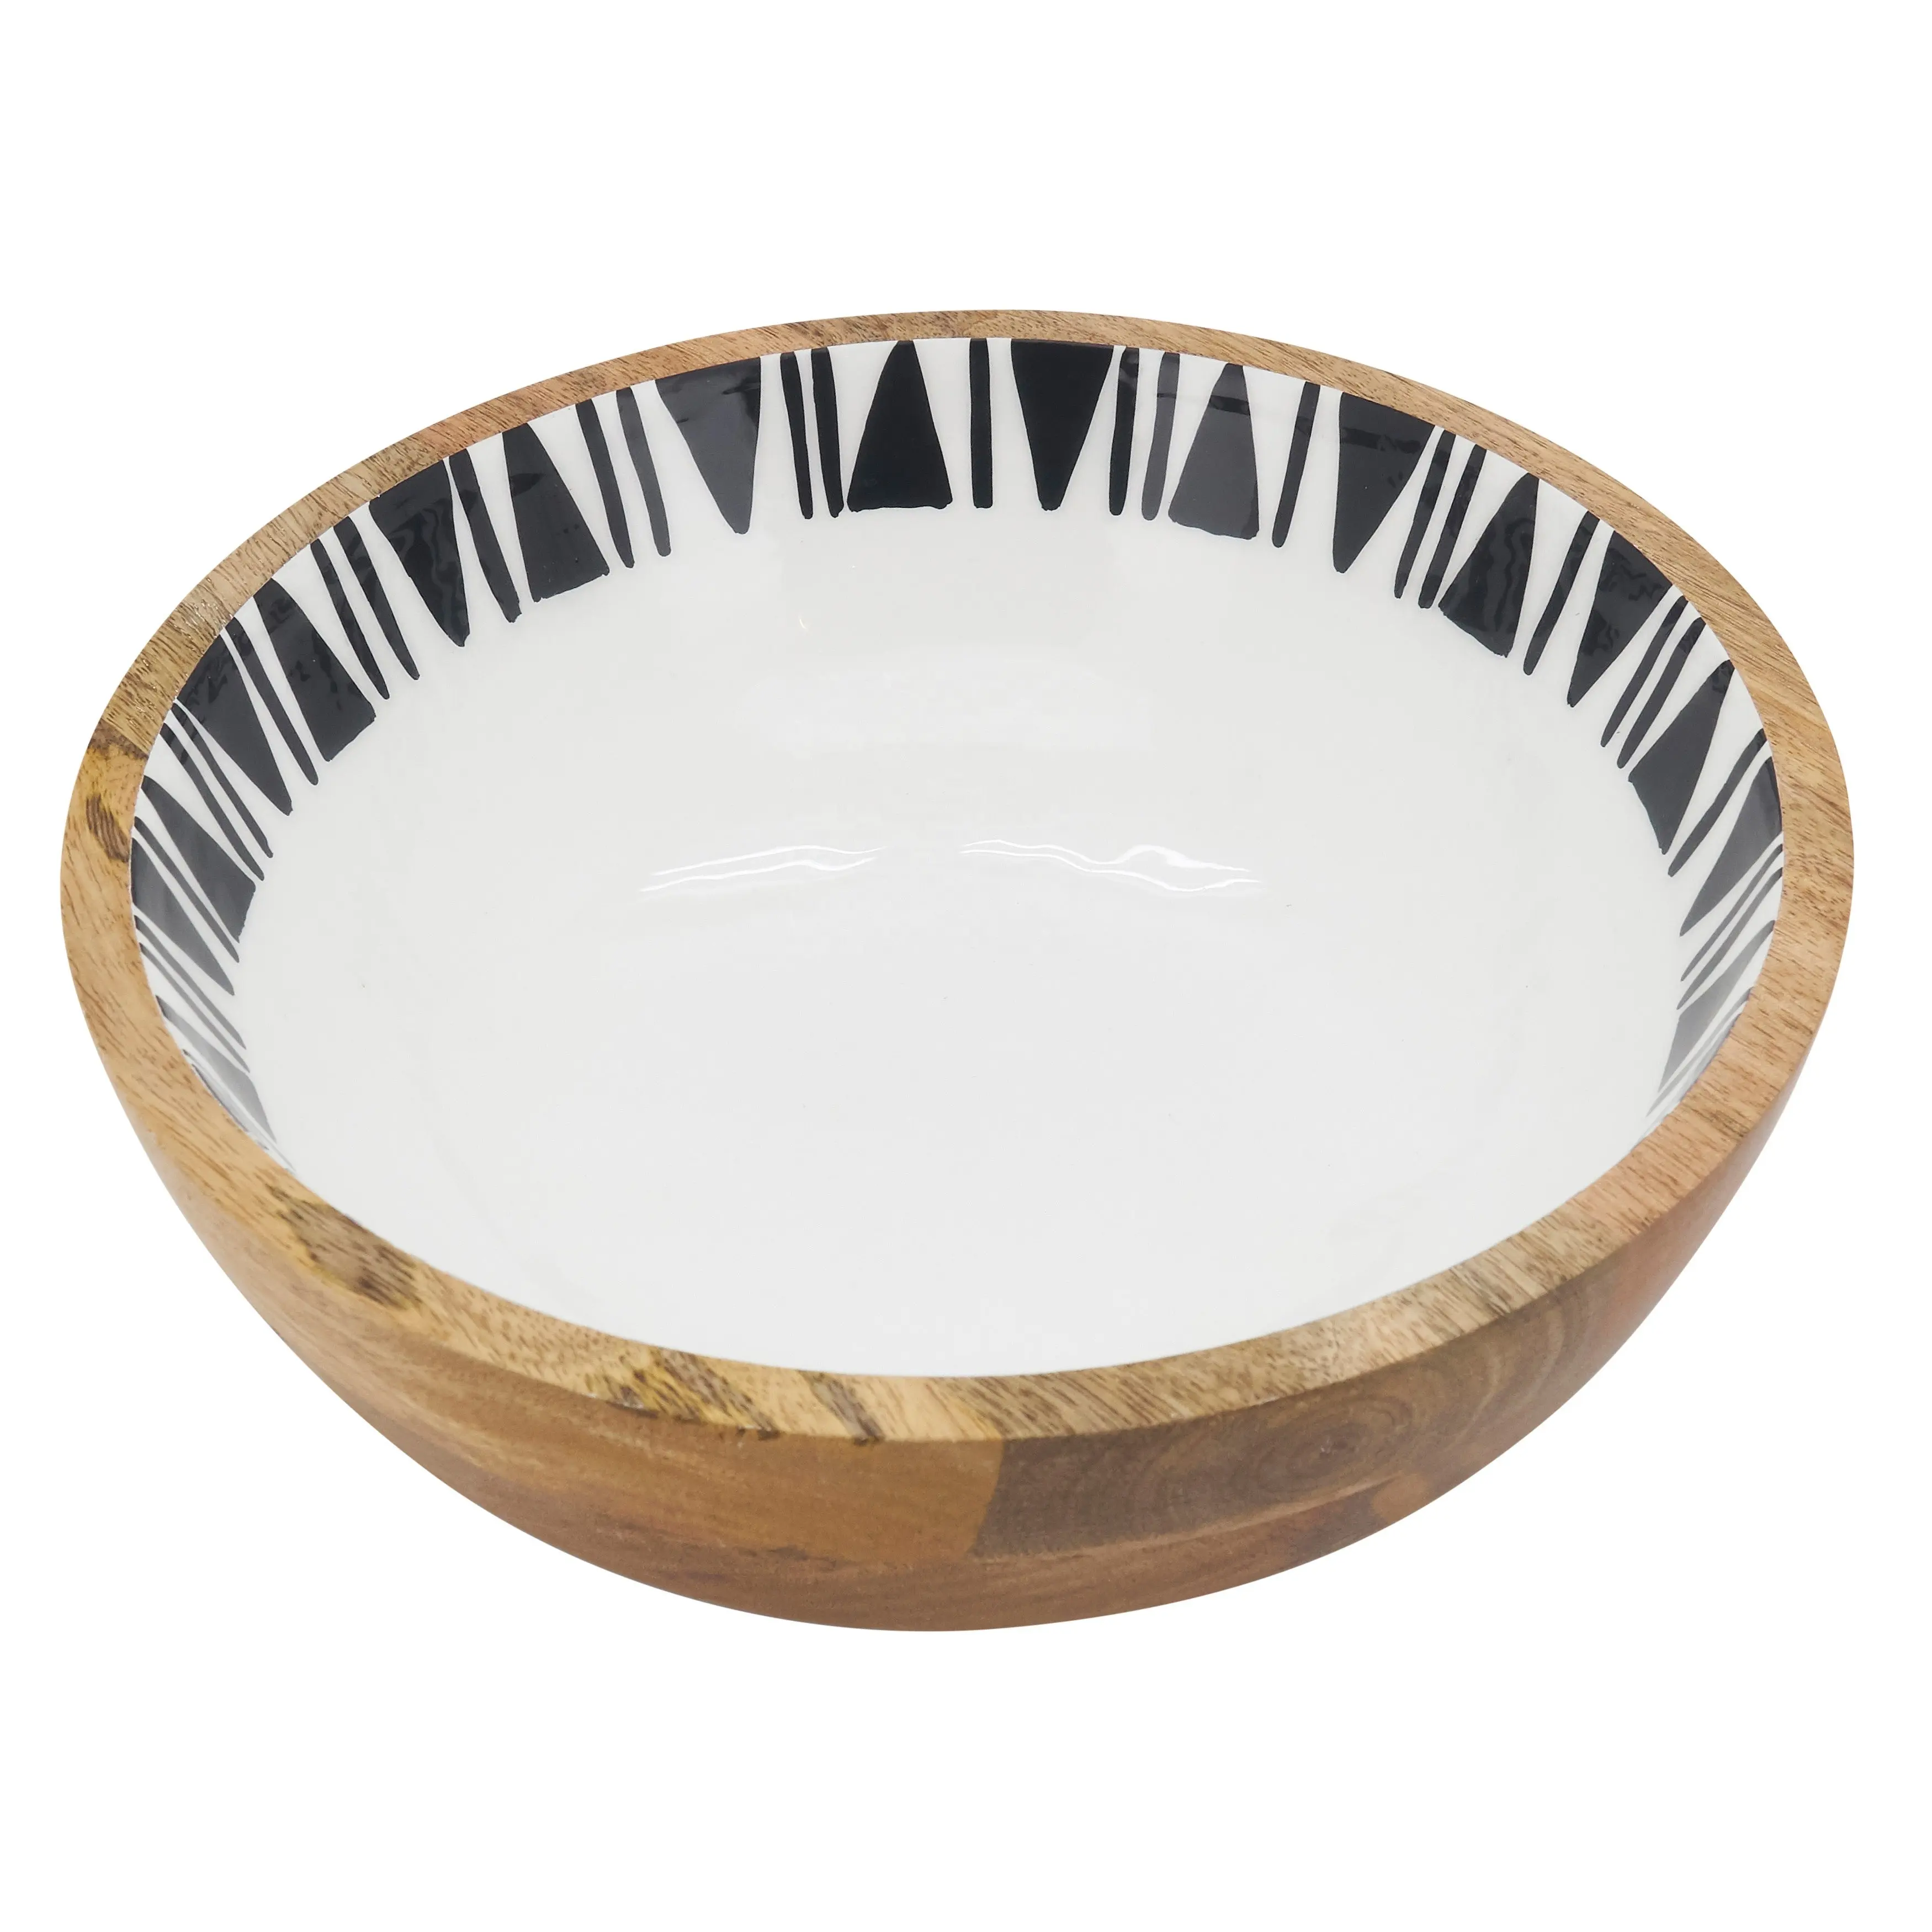 Enamel Wooden Serving Bowl in Cheap Price From India Latest Multi Color Mango Wood Serving Bowl for Table Top Wooden Soup Bowl